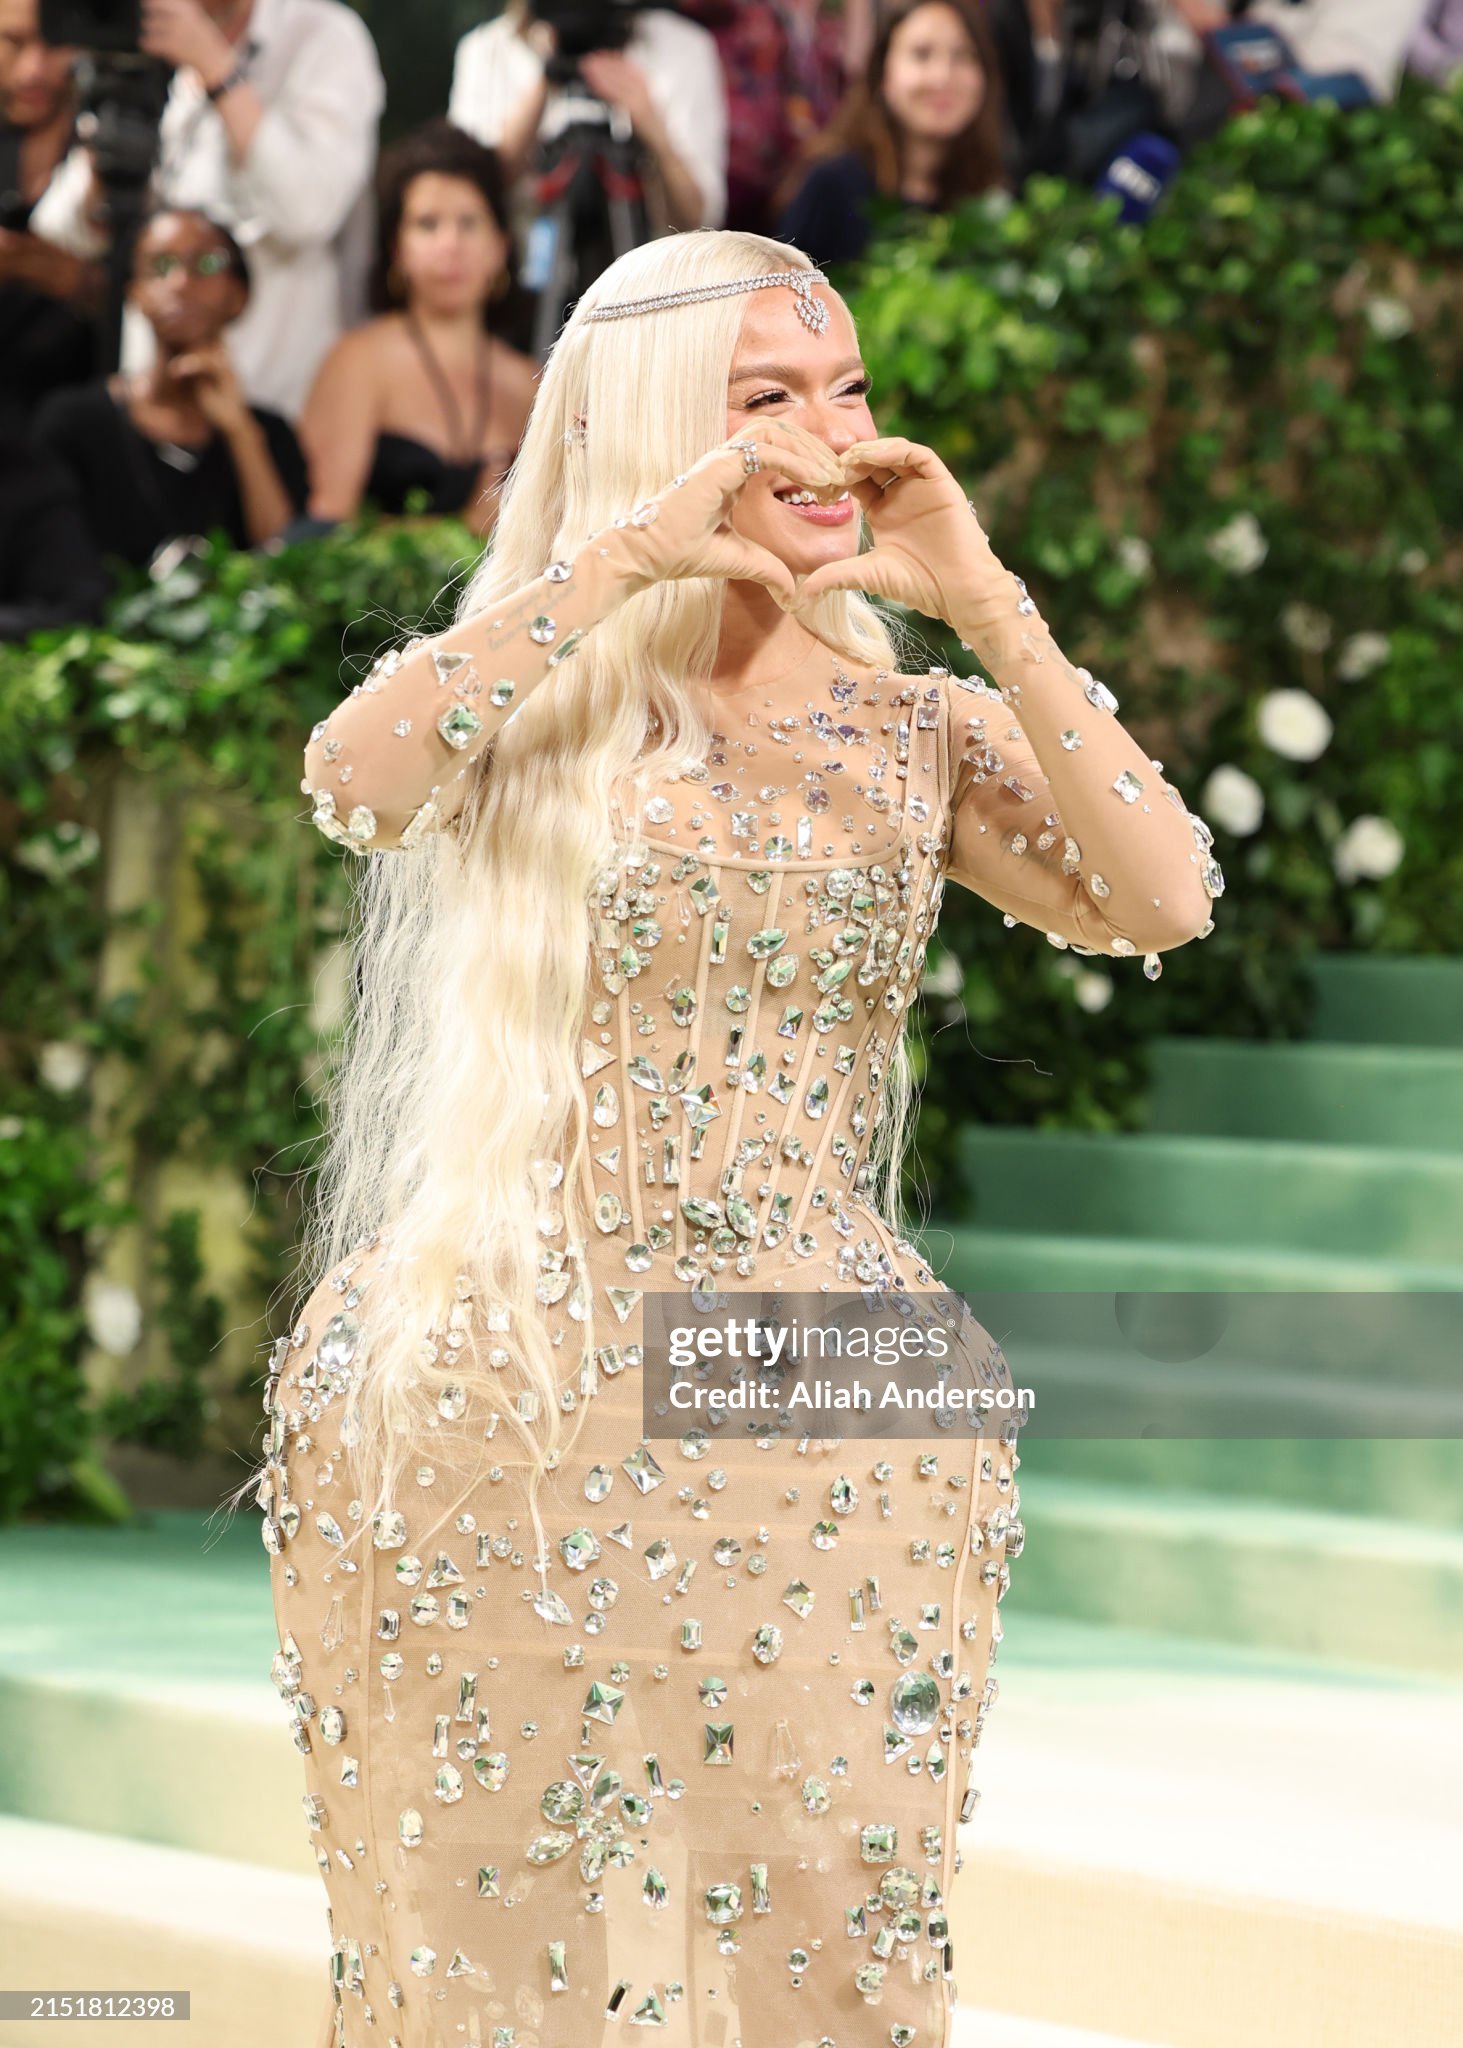 gettyimages-2151812398-2048x2048.jpg